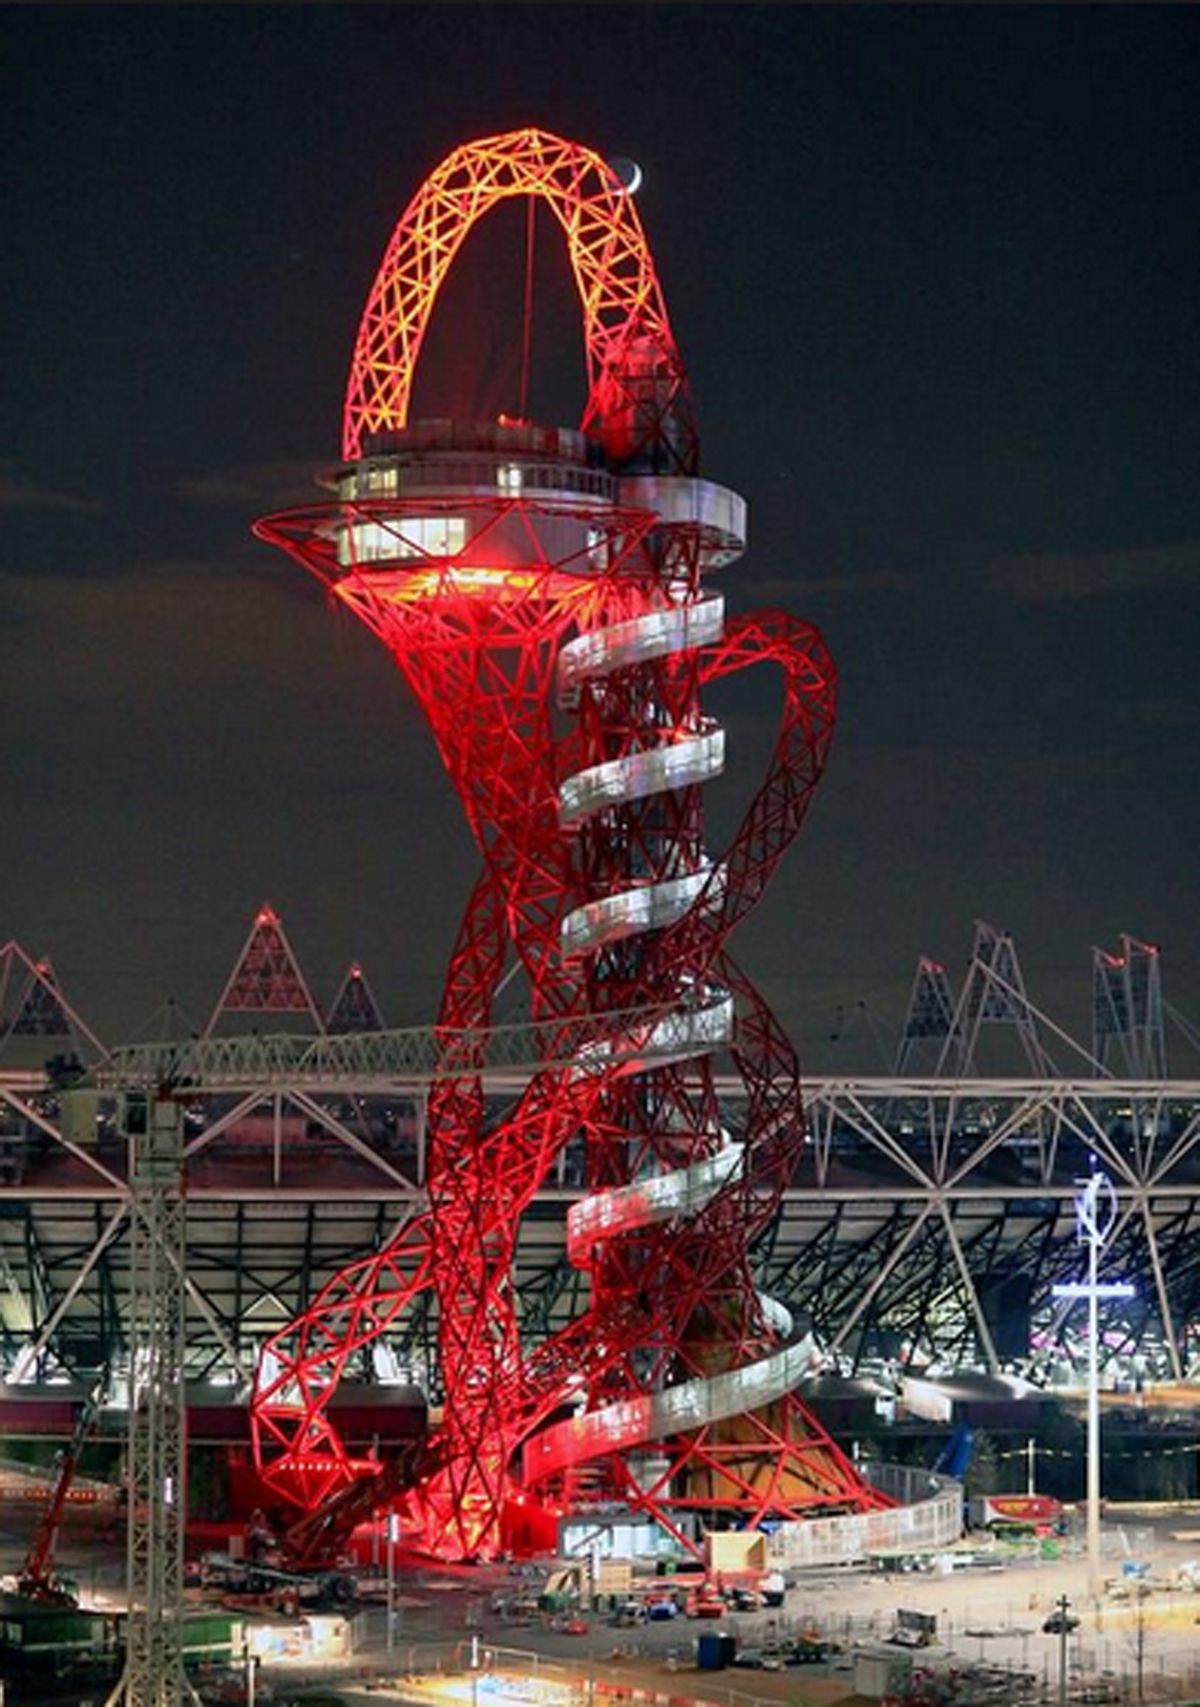 Artist Cecil Balmond, selected to design an art installation for the CTA, worked with “Bean” designer Anish Kapoor on the tower that served as the centerpiece of the 2012 London Olympics. | Provided